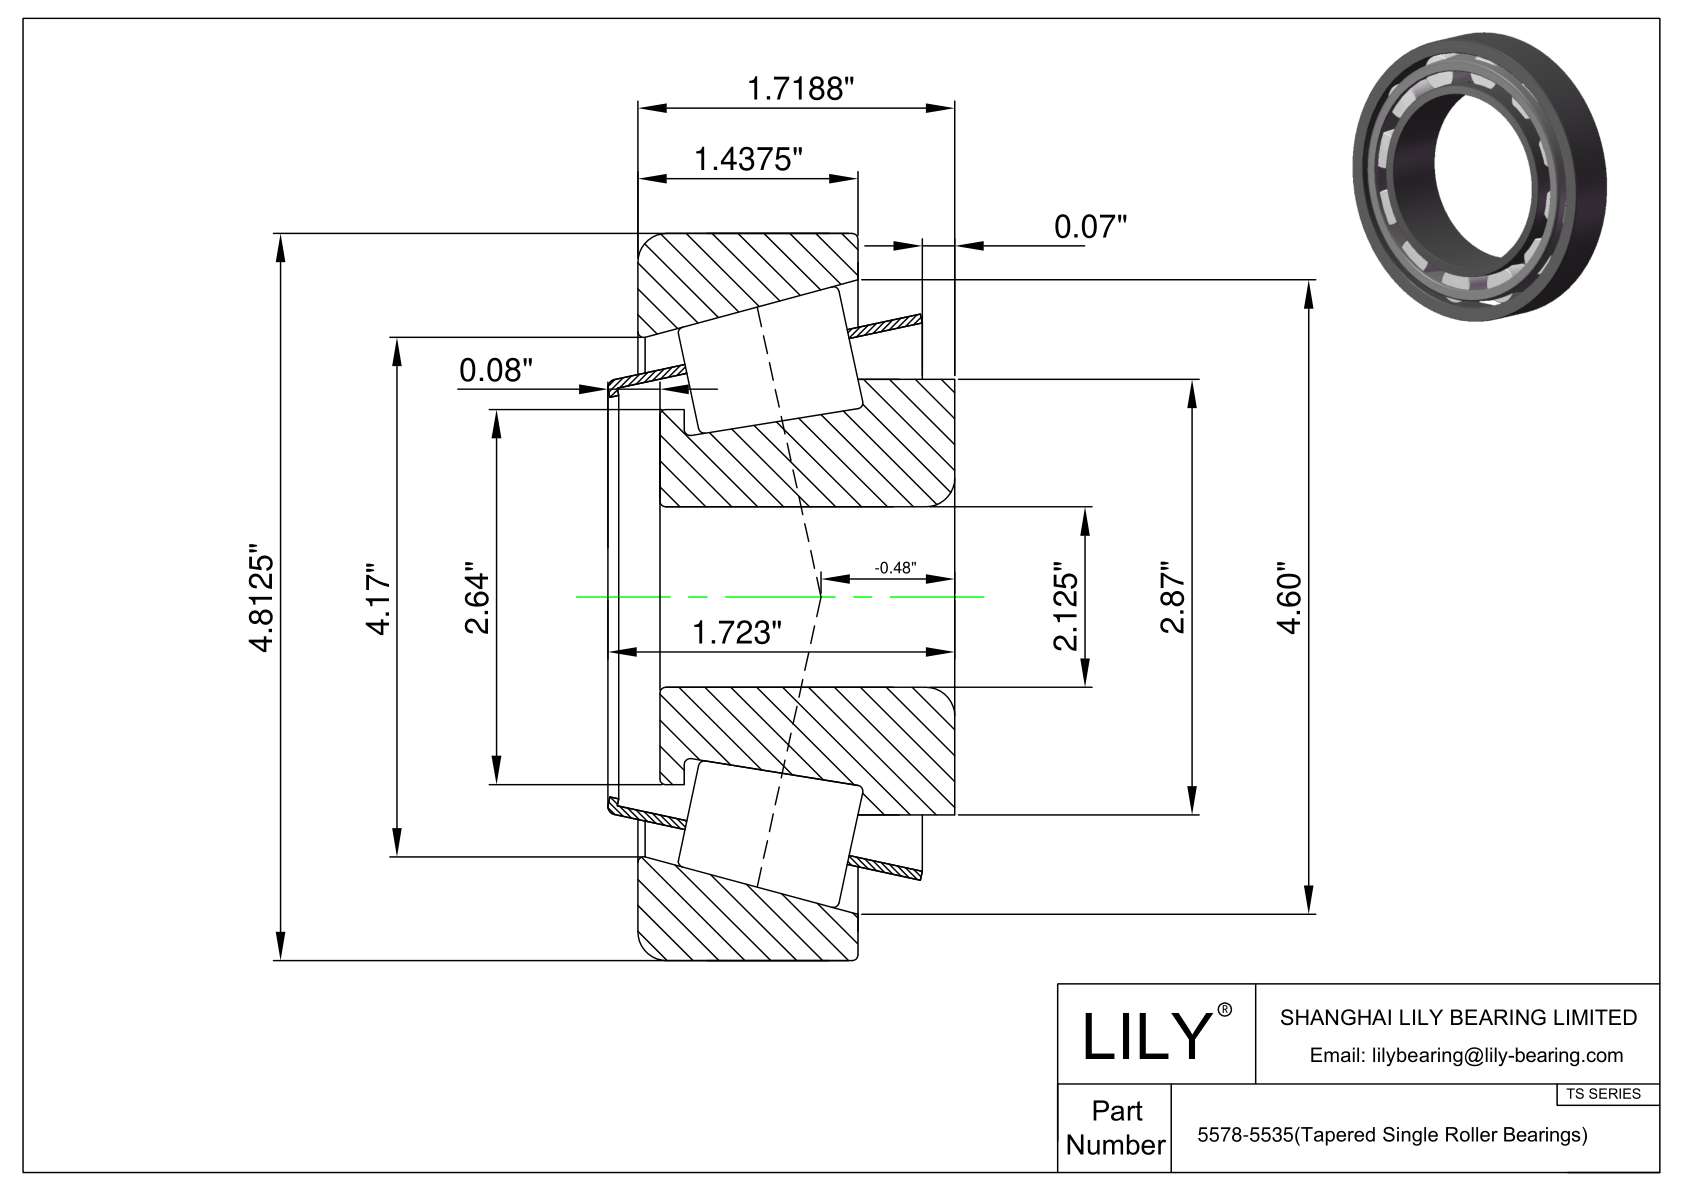 5578-5535 TS (Tapered Single Roller Bearings) (Imperial) cad drawing